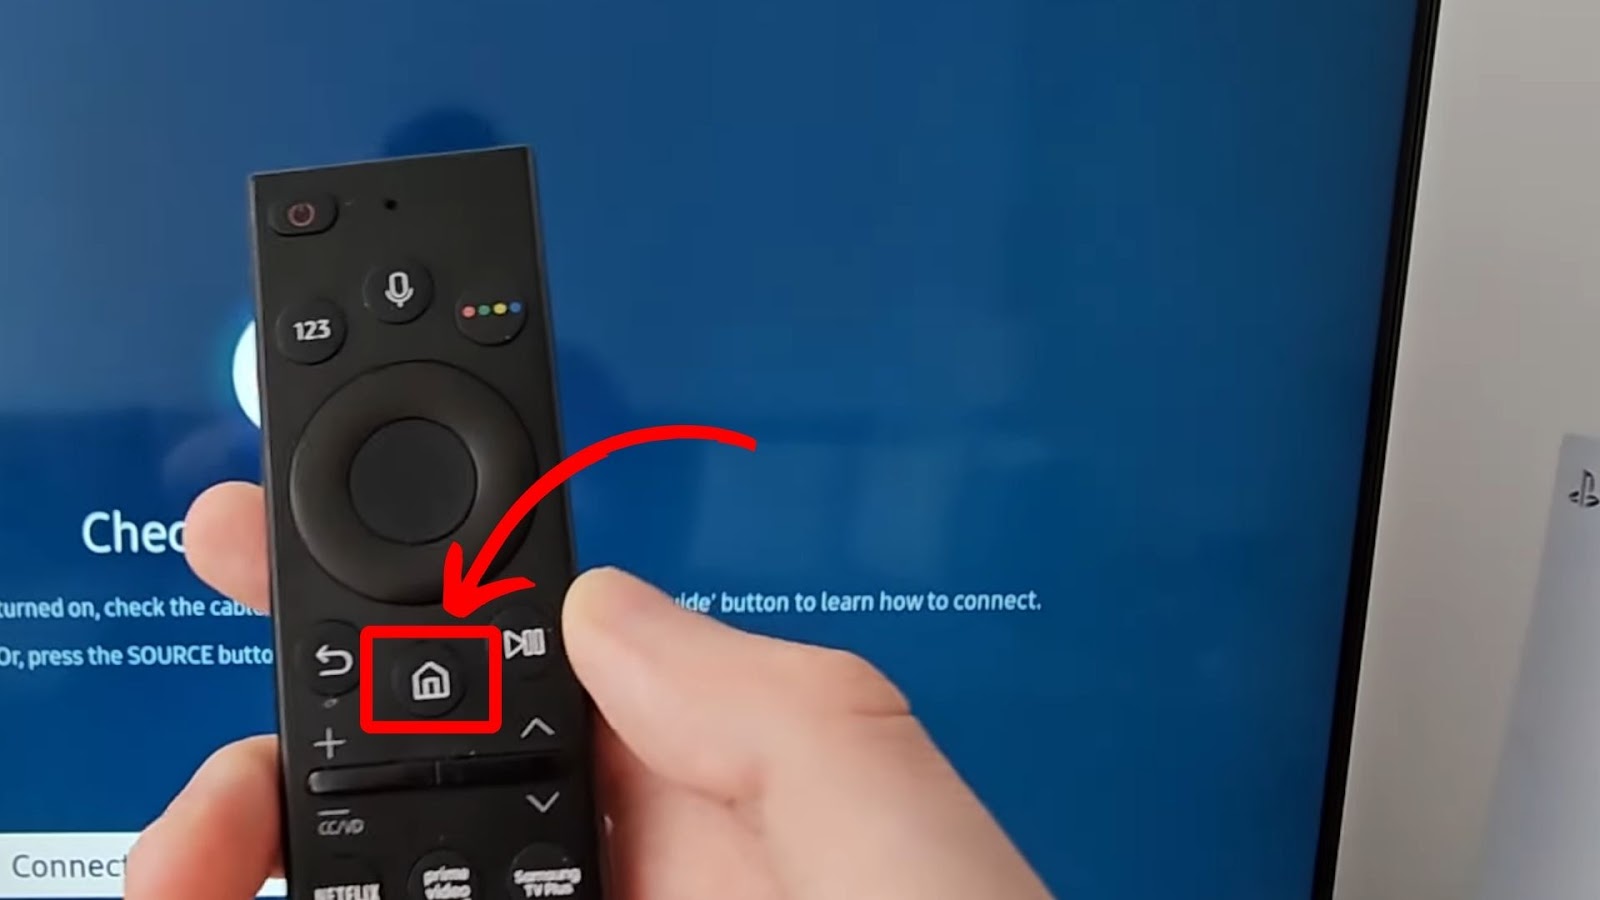 Pressing the Home Button on Samsung TV